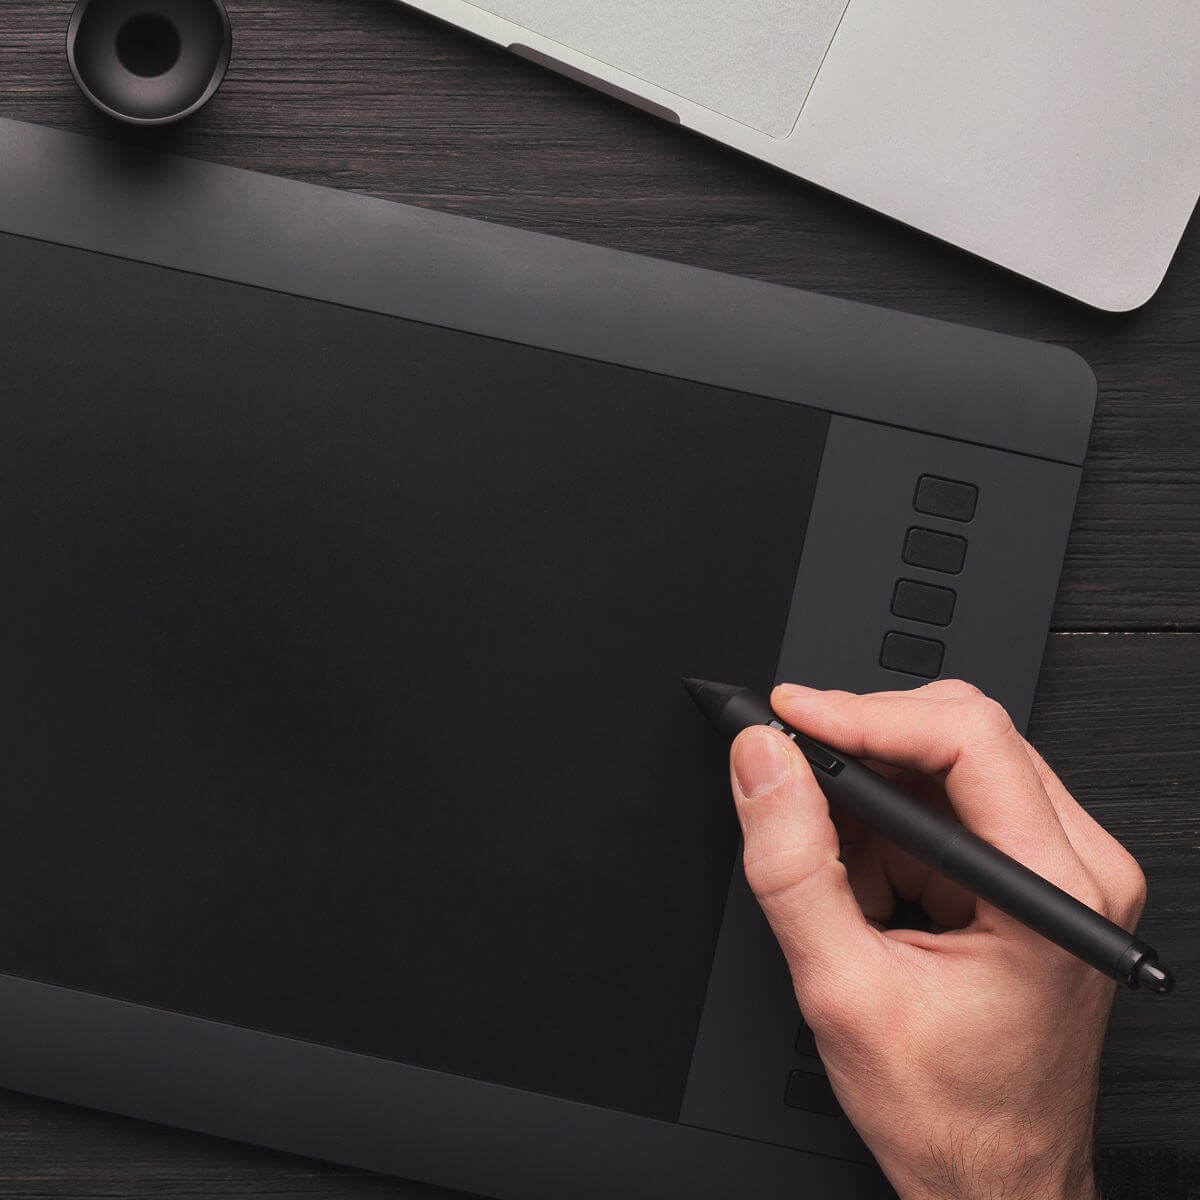 Sale > standalone drawing tablets > in stock